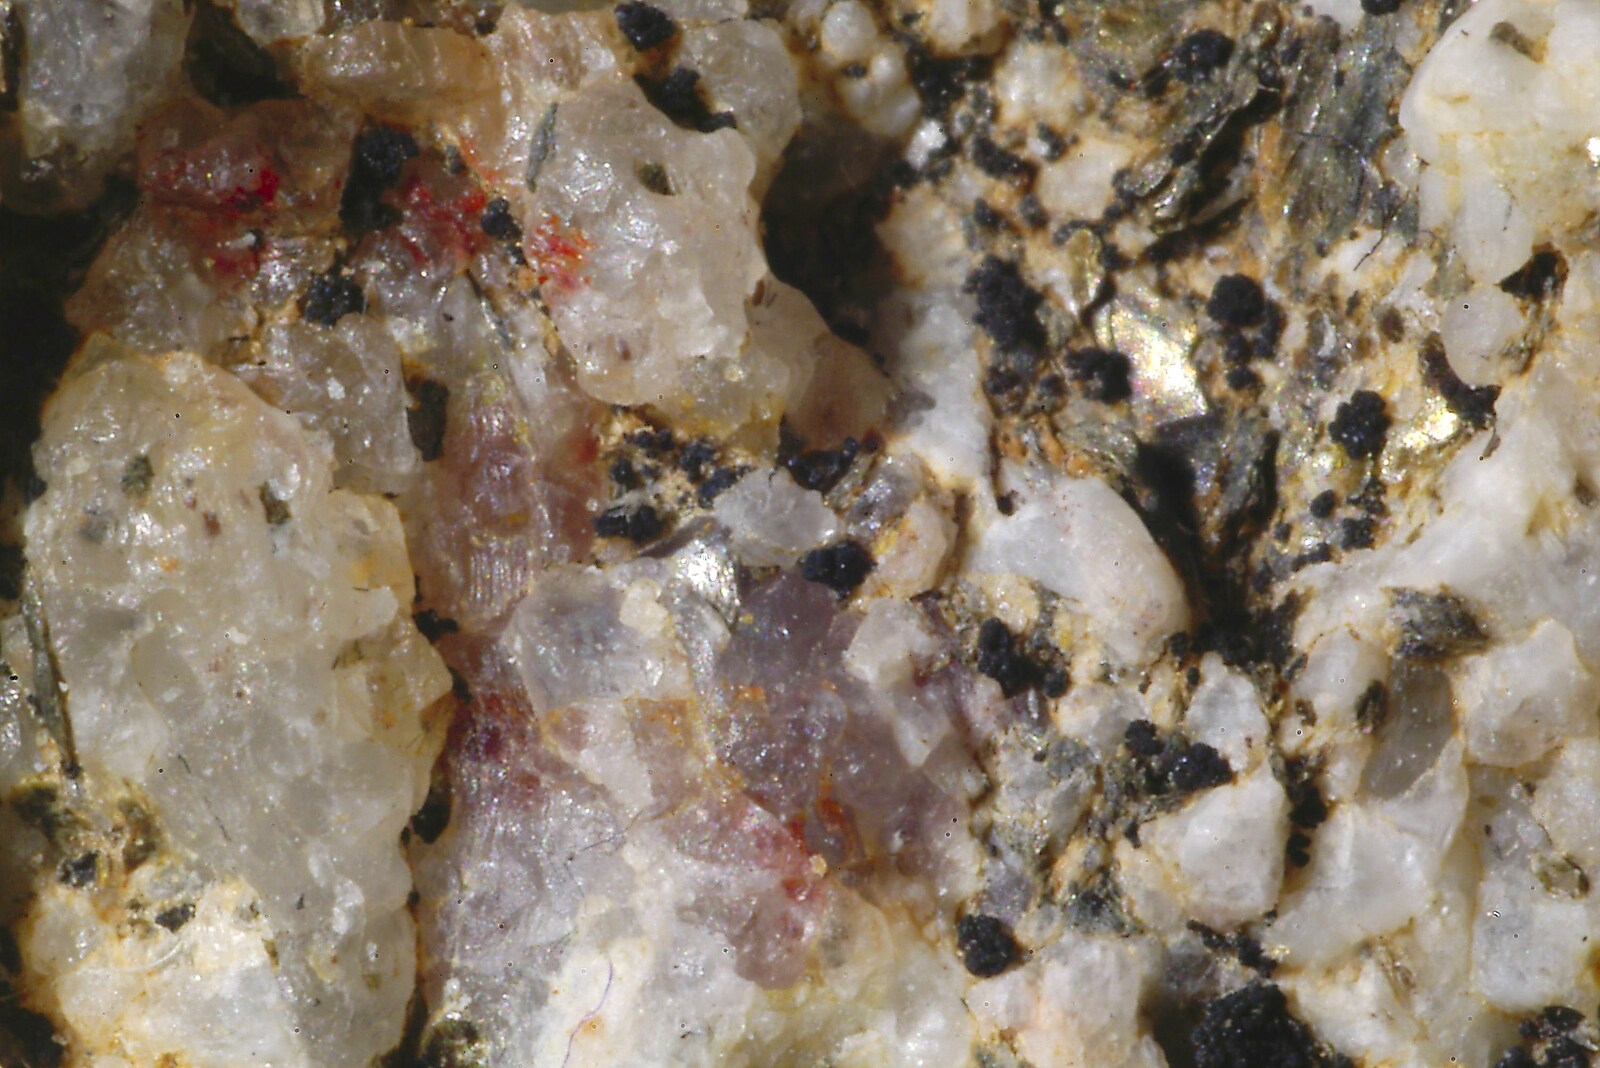 Close-up of some quartz granite from Fun With Bellows: Macro Photography, Brome, Suffolk - 13th May 2006